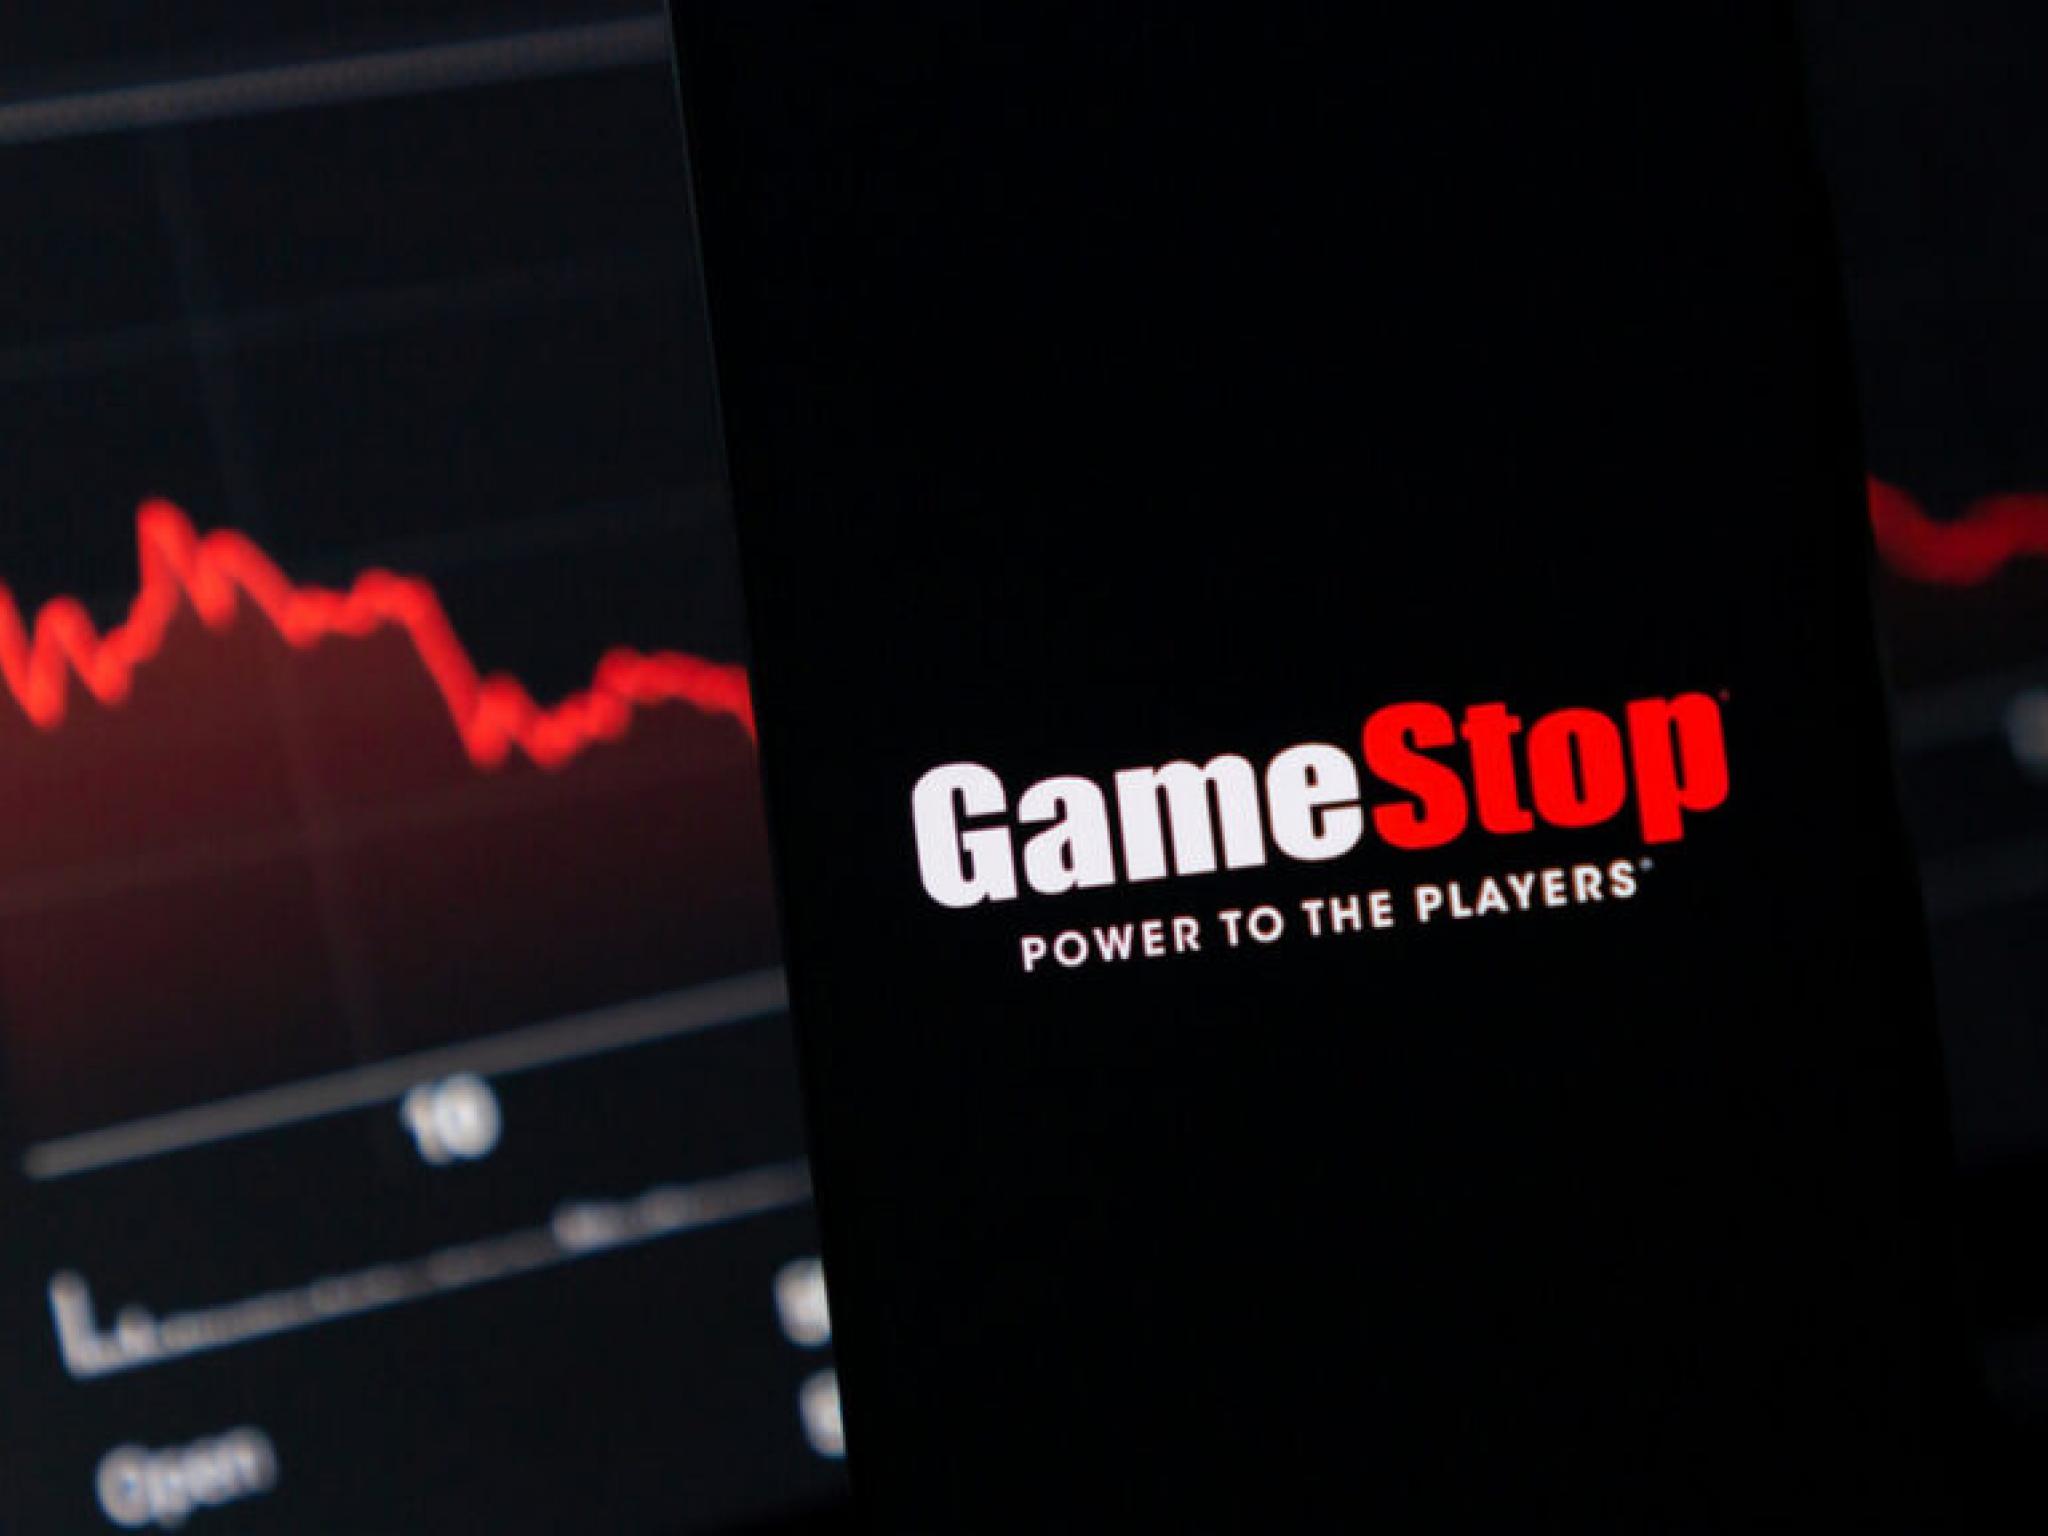  roaring-kittys-gamestop-options-could-be-worth-54m-but-cashing-out-might-be-tricky-everybodys-hyper-aware-of-this-now 